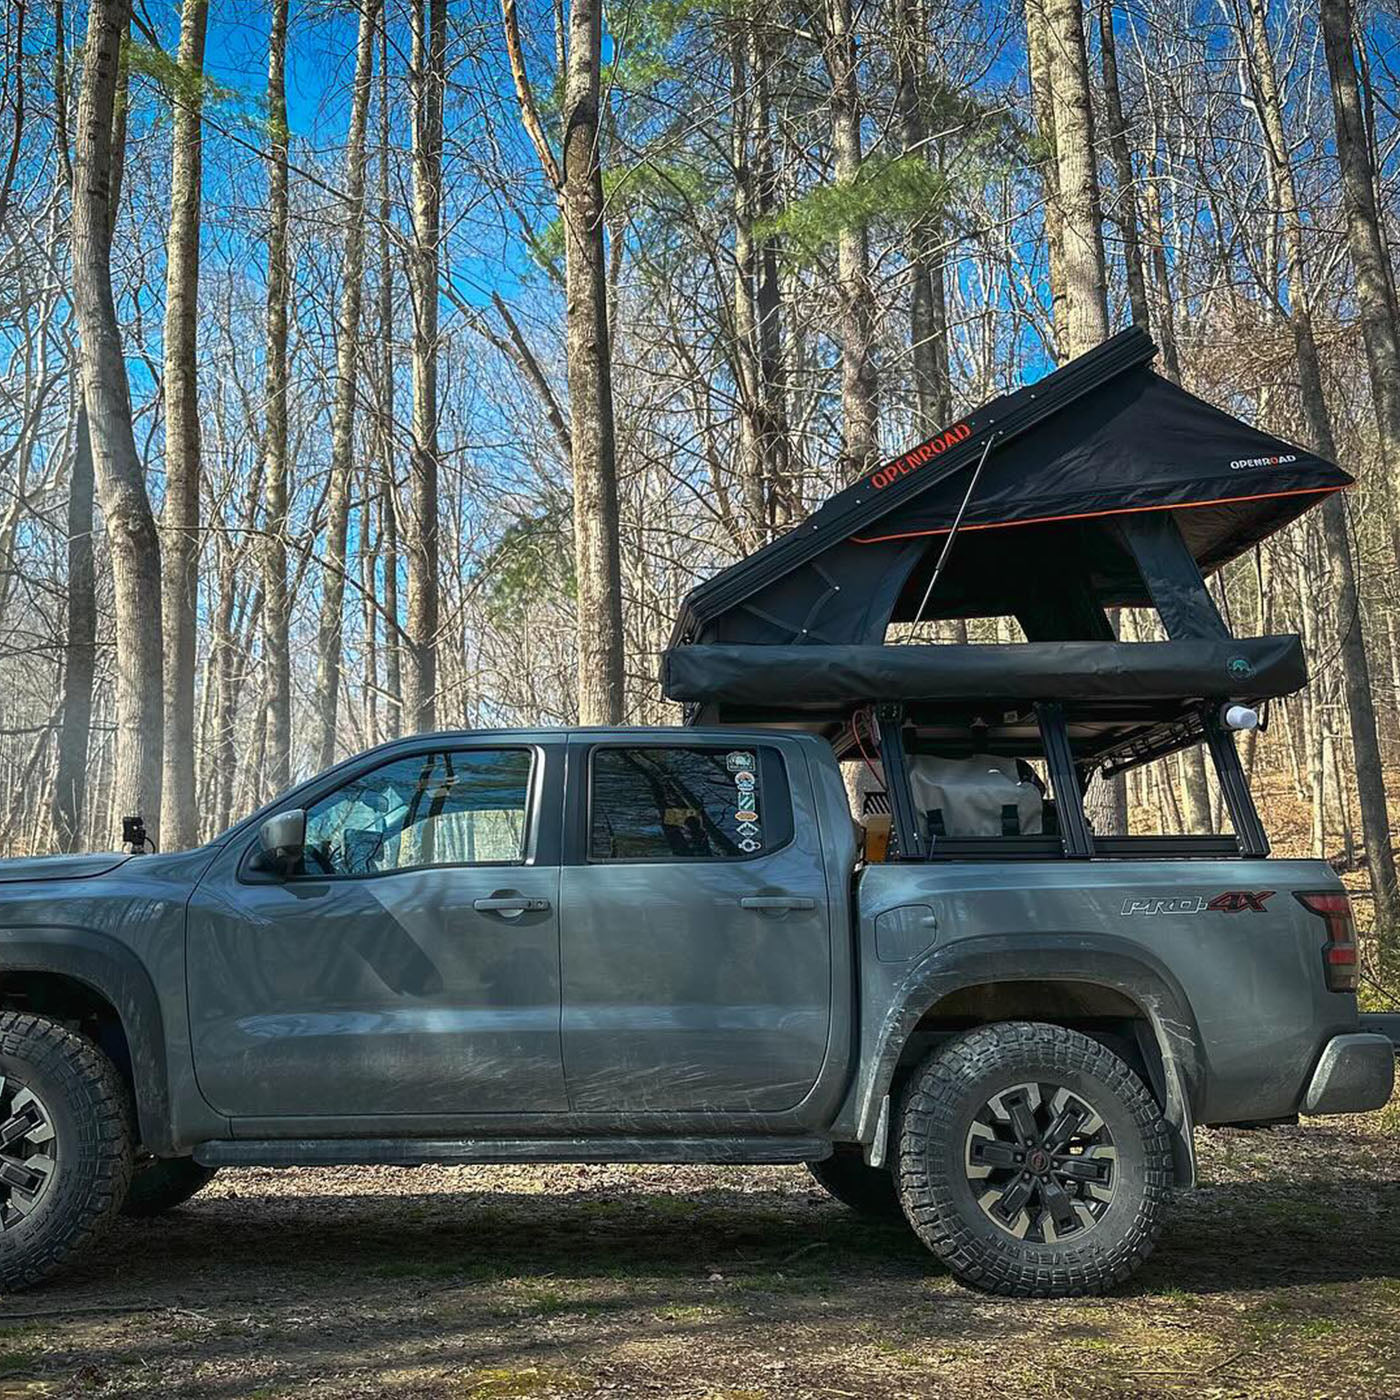 OPENROAD Aluminum Hard Shell Roof Top Tent - PeakRoof Series  openroad4wd.com   